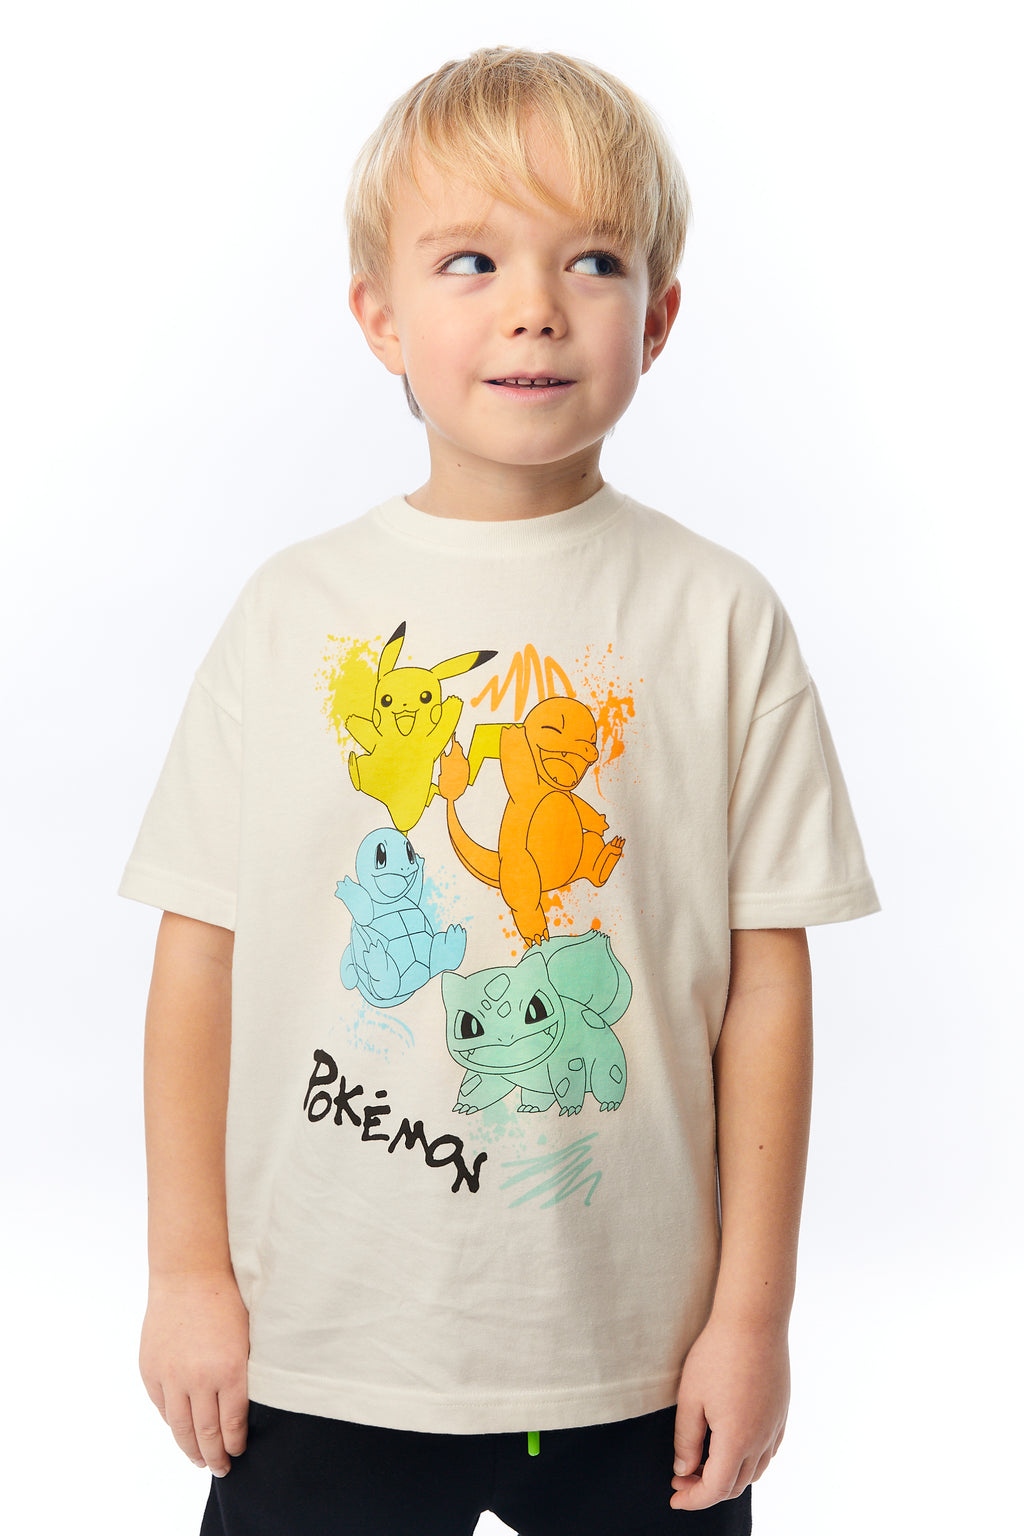 Pokemon character printed Over Sized T shirt